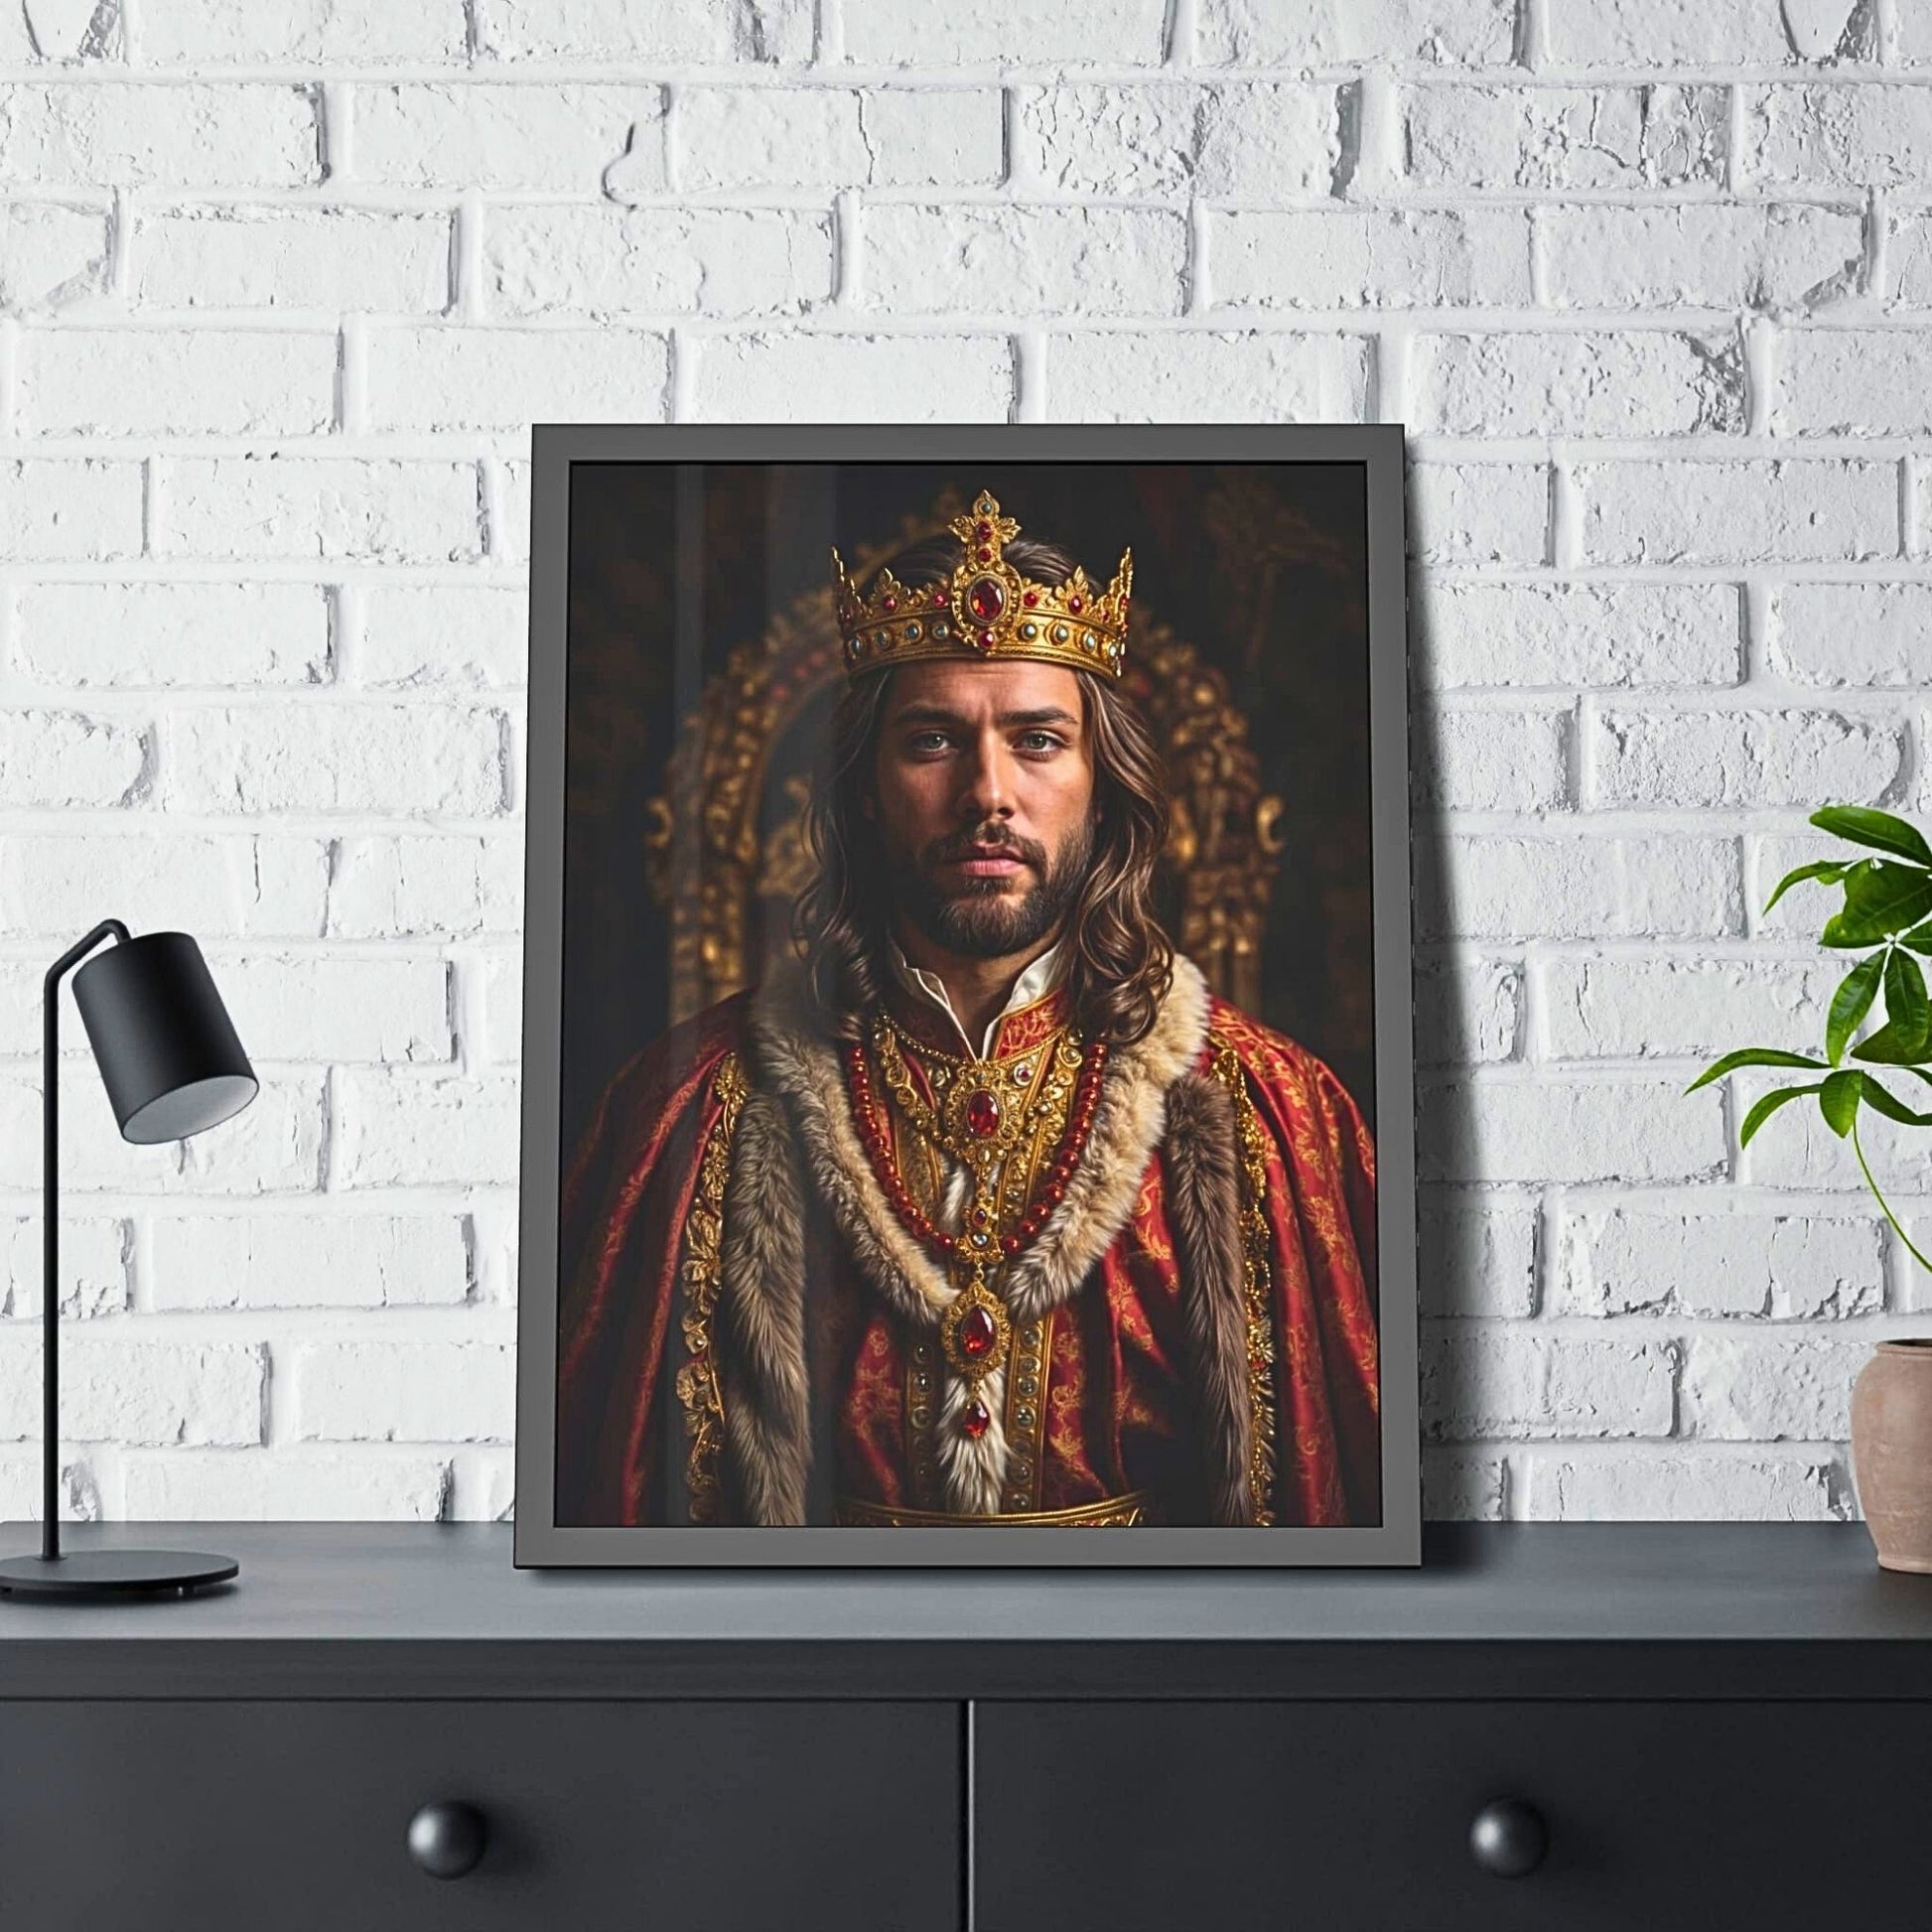 Create a captivating custom royal portrait inspired by the Renaissance, transforming your photo into a regal masterpiece. Whether for a birthday surprise or a thoughtful gesture for him, this personalized king portrait is a timeless gift. With its historical charm and digital download convenience, it's a unique way to honor special moments with a touch of regal elegance.